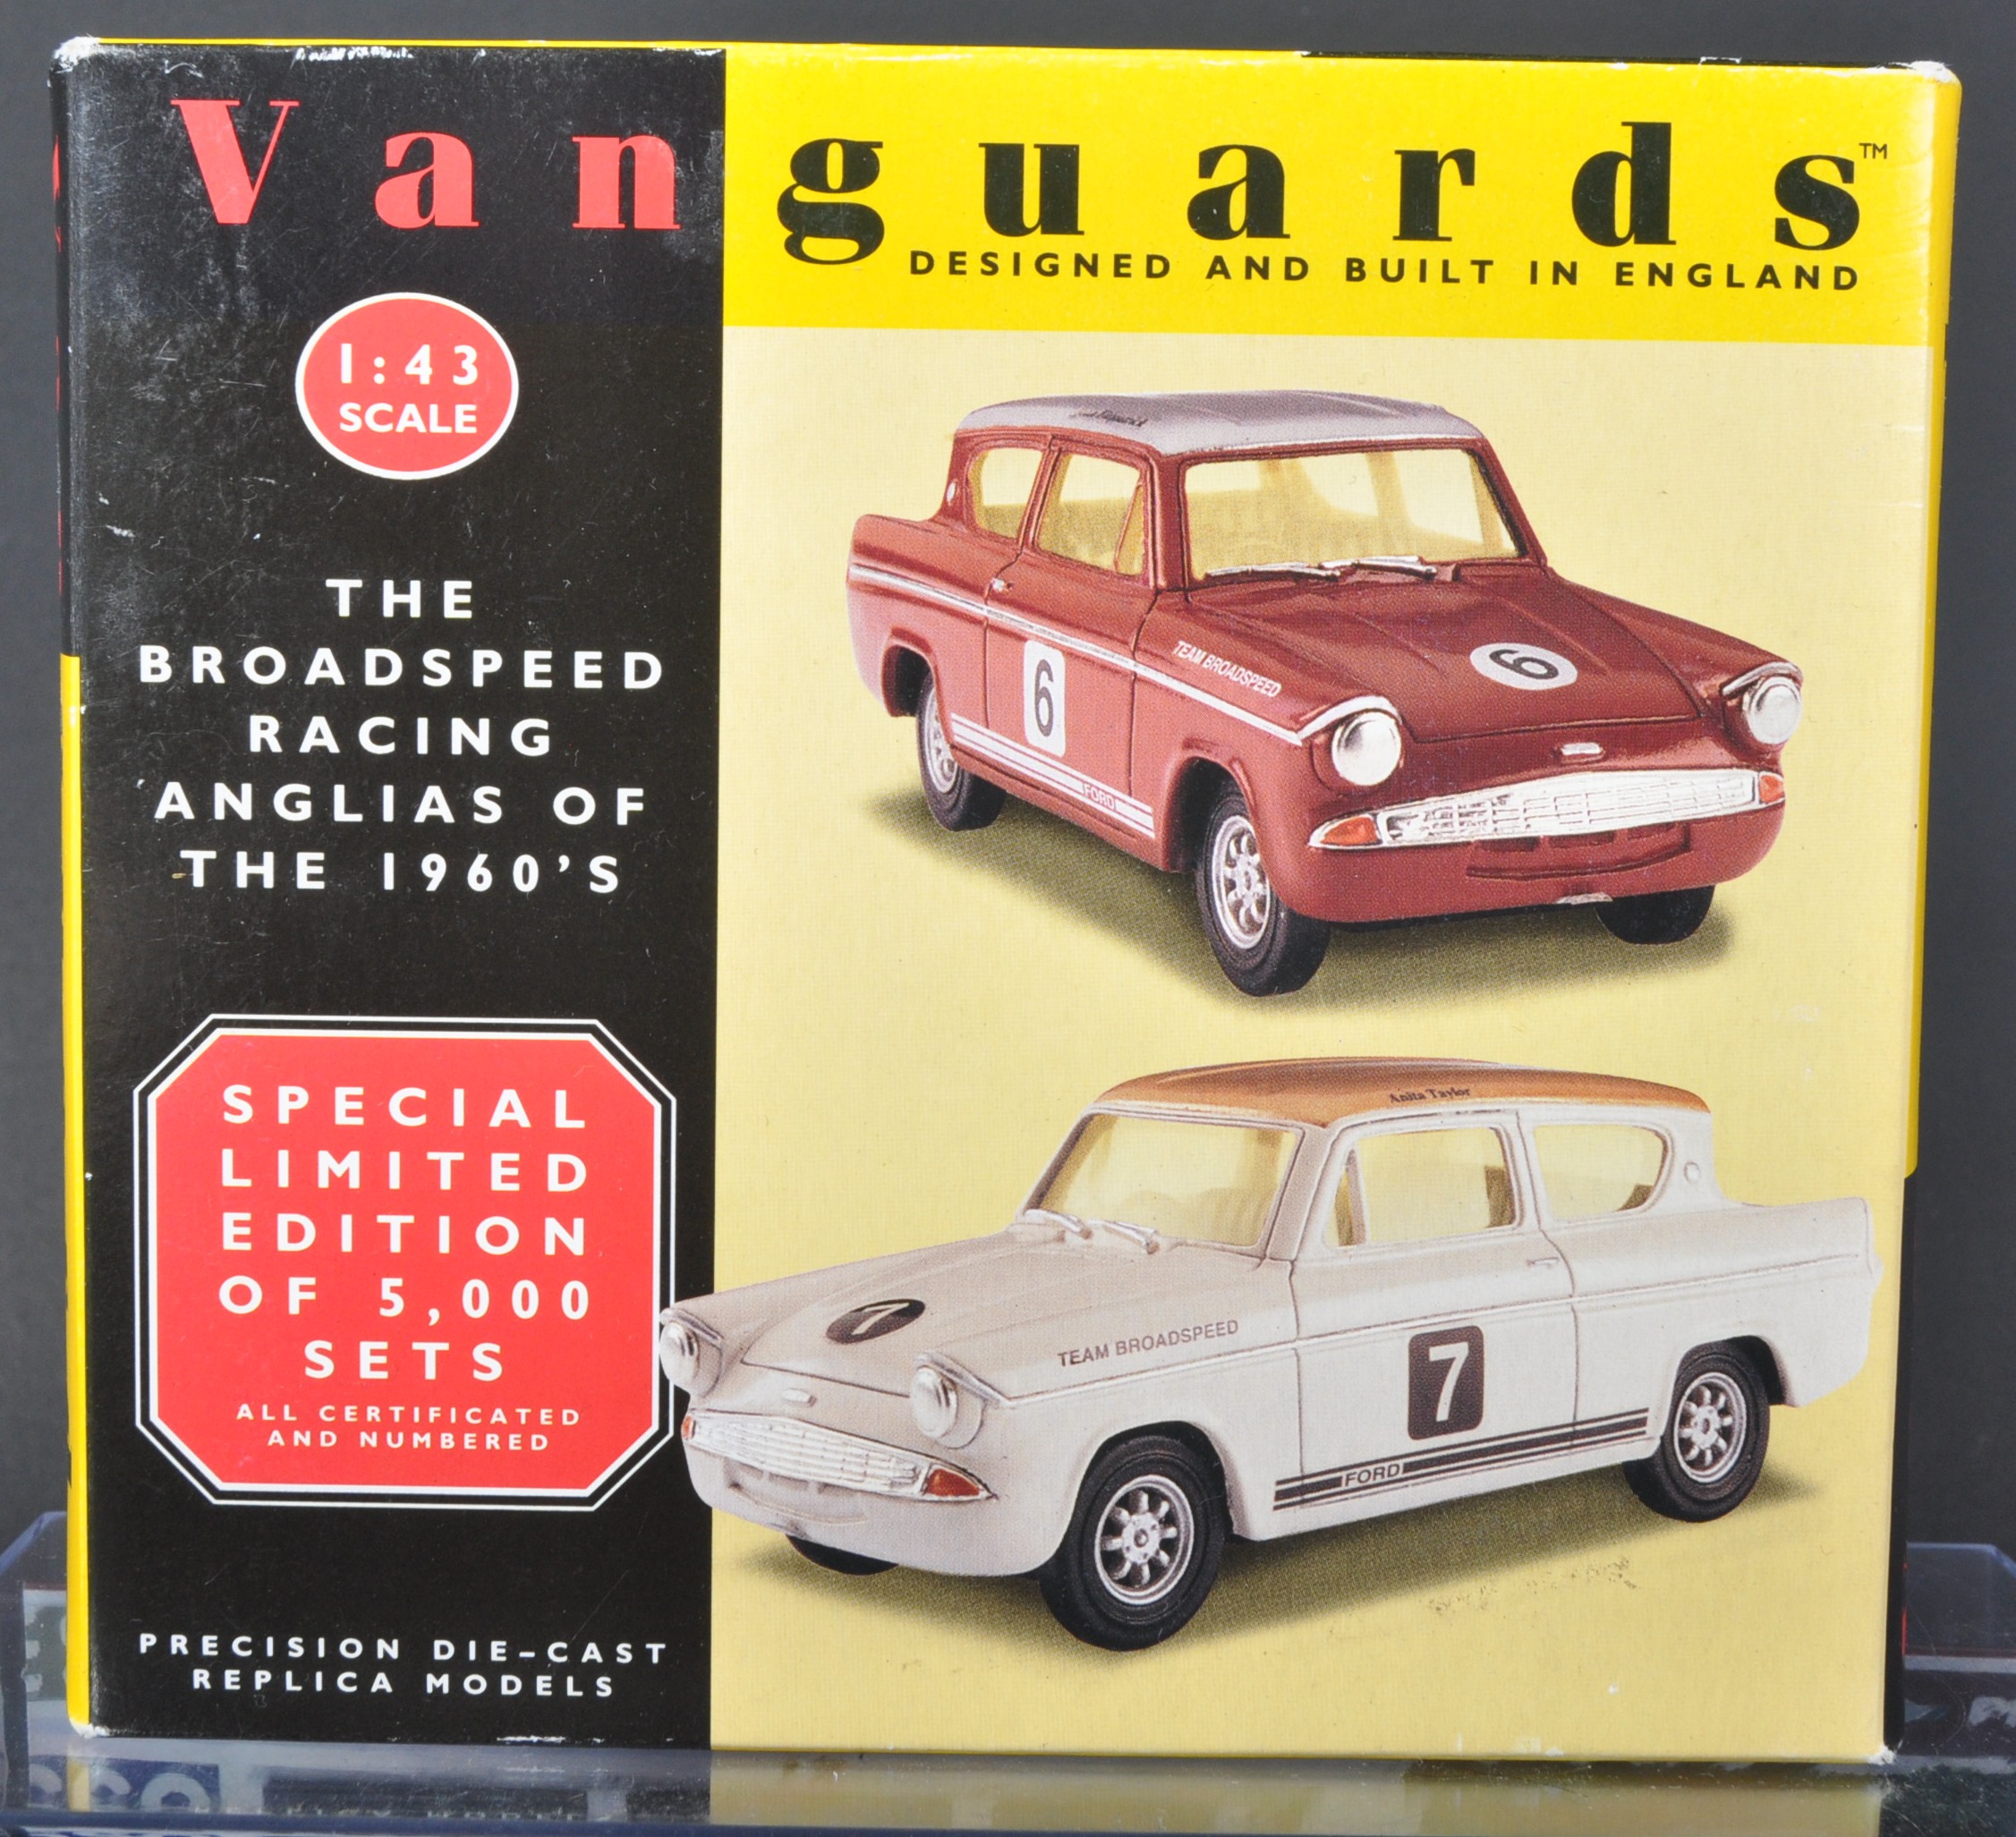 TWO 1/43 SCALE BROADSPEED INTEREST DIECAST MODEL CARS - Image 4 of 5